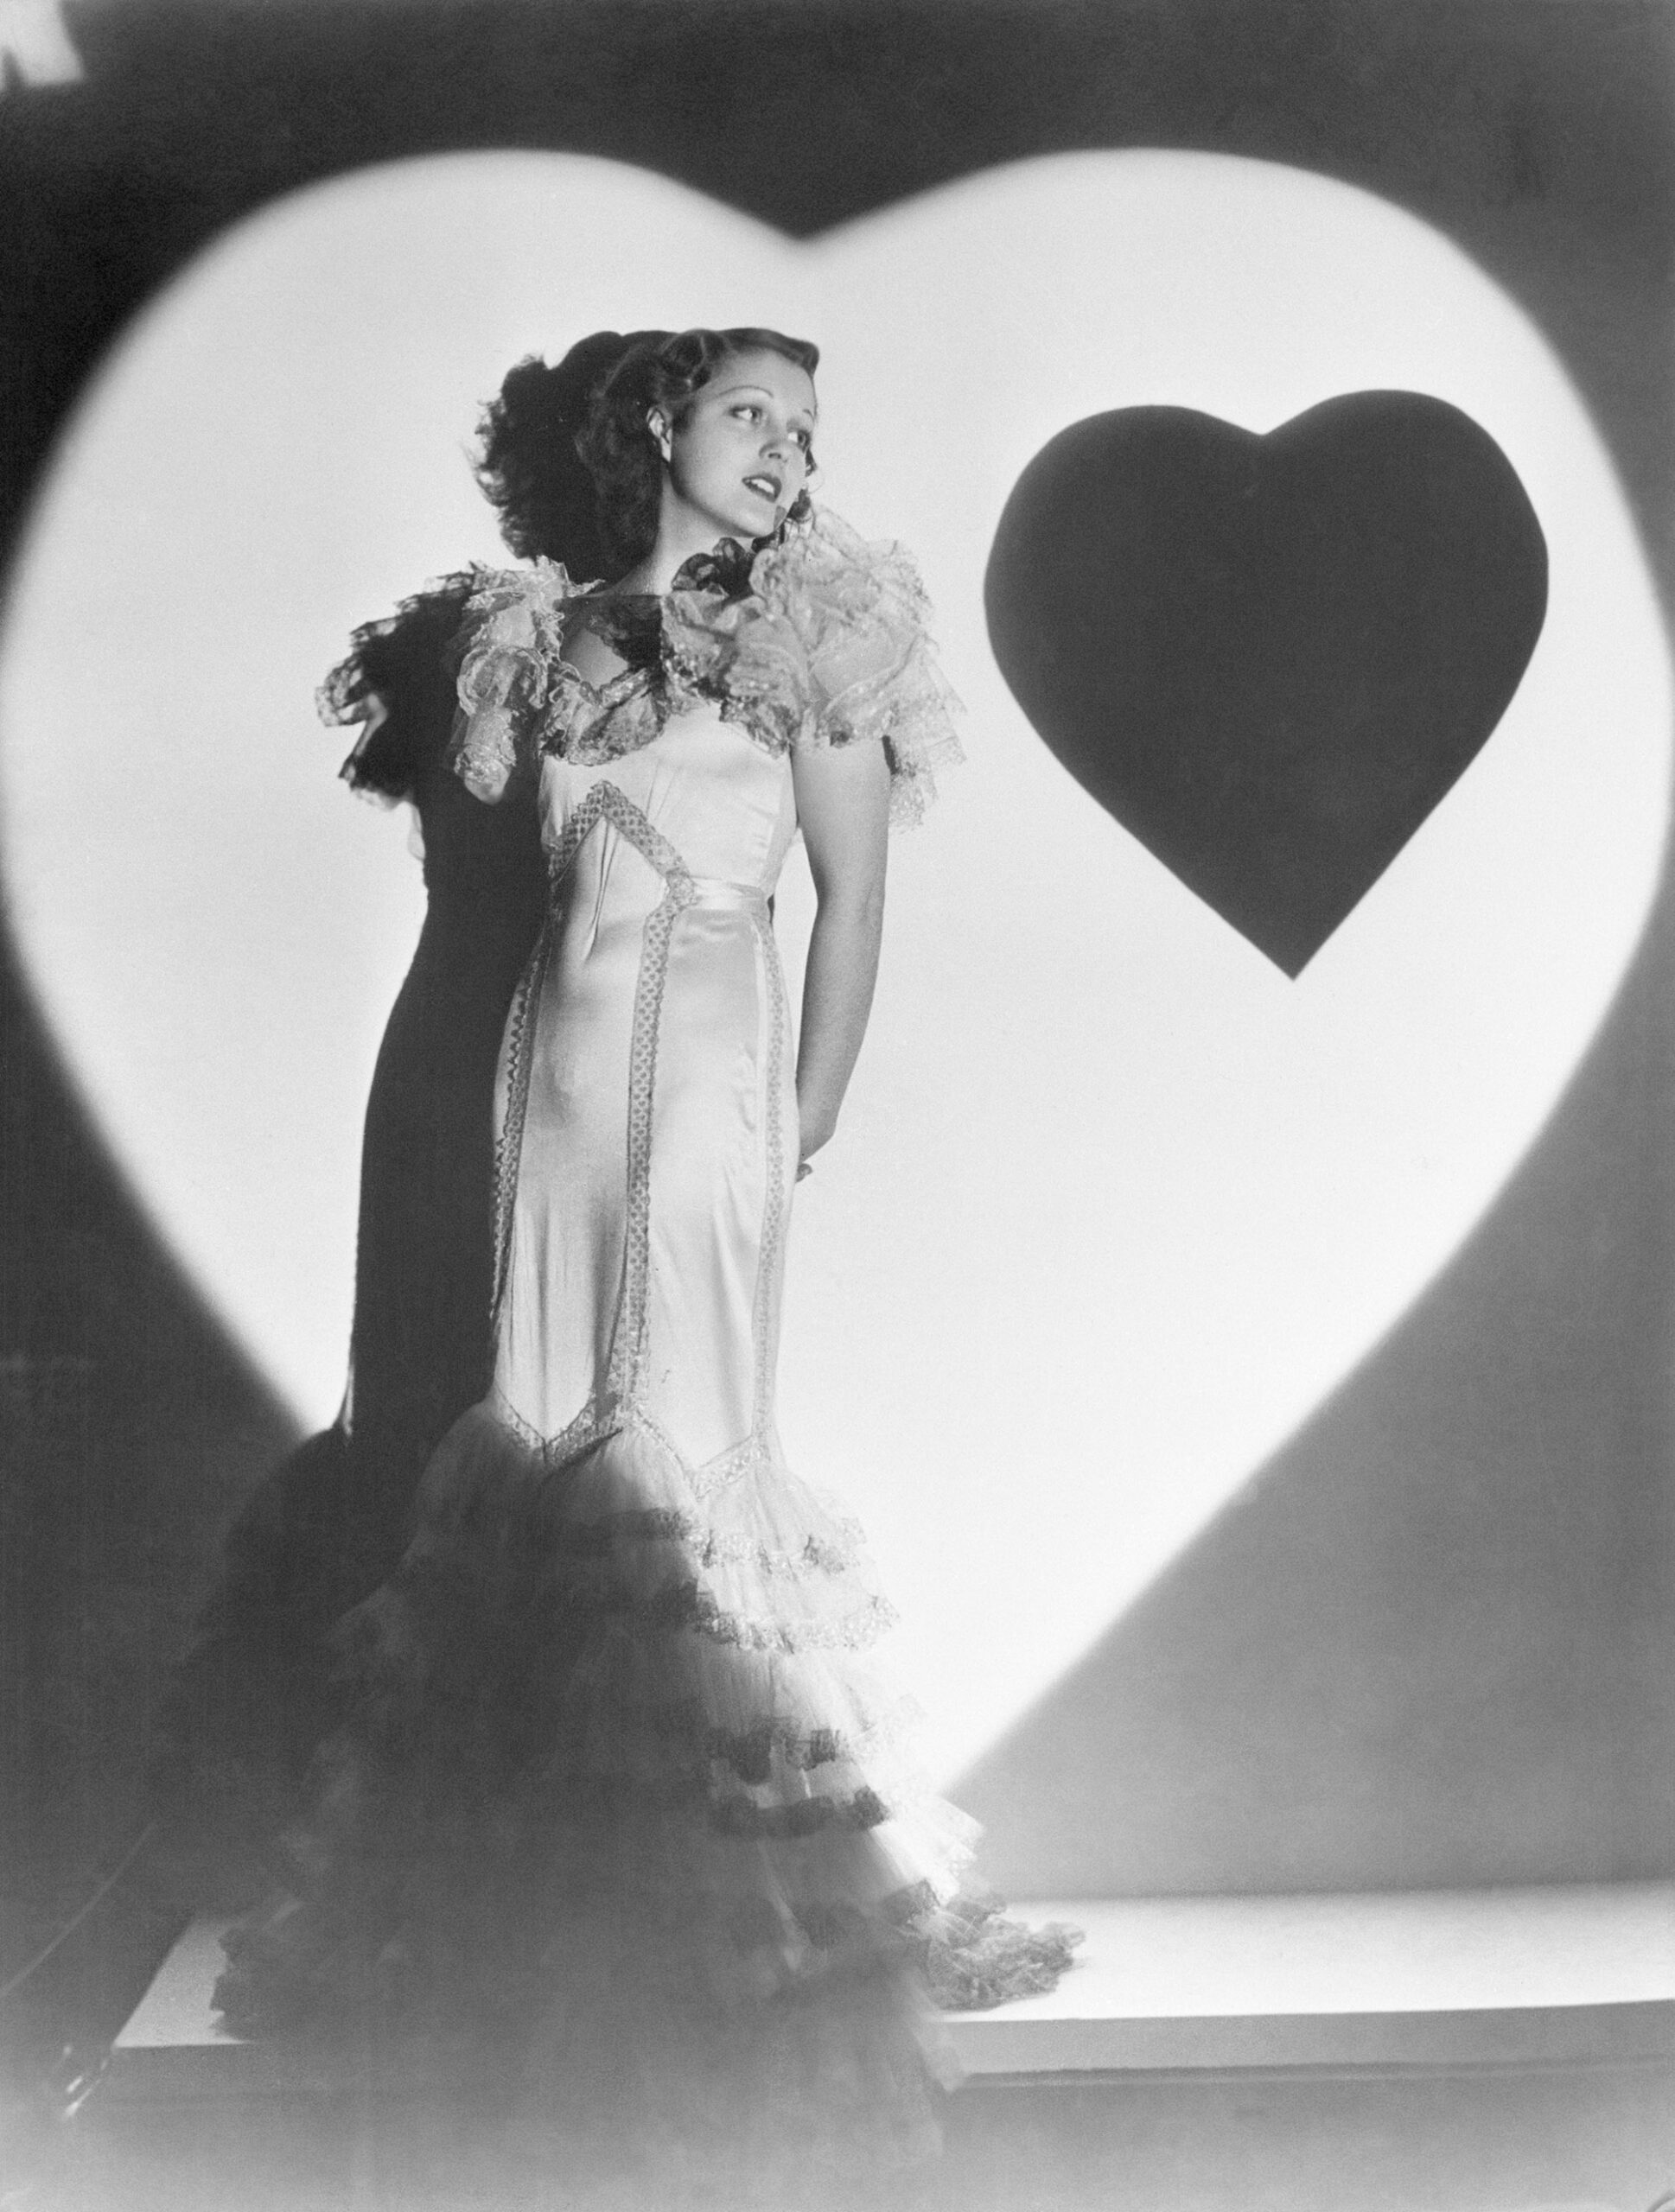 Actress Frances Drake, wearing a fancy gown with frills at the bottom and at the shoulders, leans against a wall that is illuminated by a heart-shaped spotlight, and with a paper heart affixed to the wall next to her, in this black-and-white Valentine's Day studio portrait from the early 1930s.